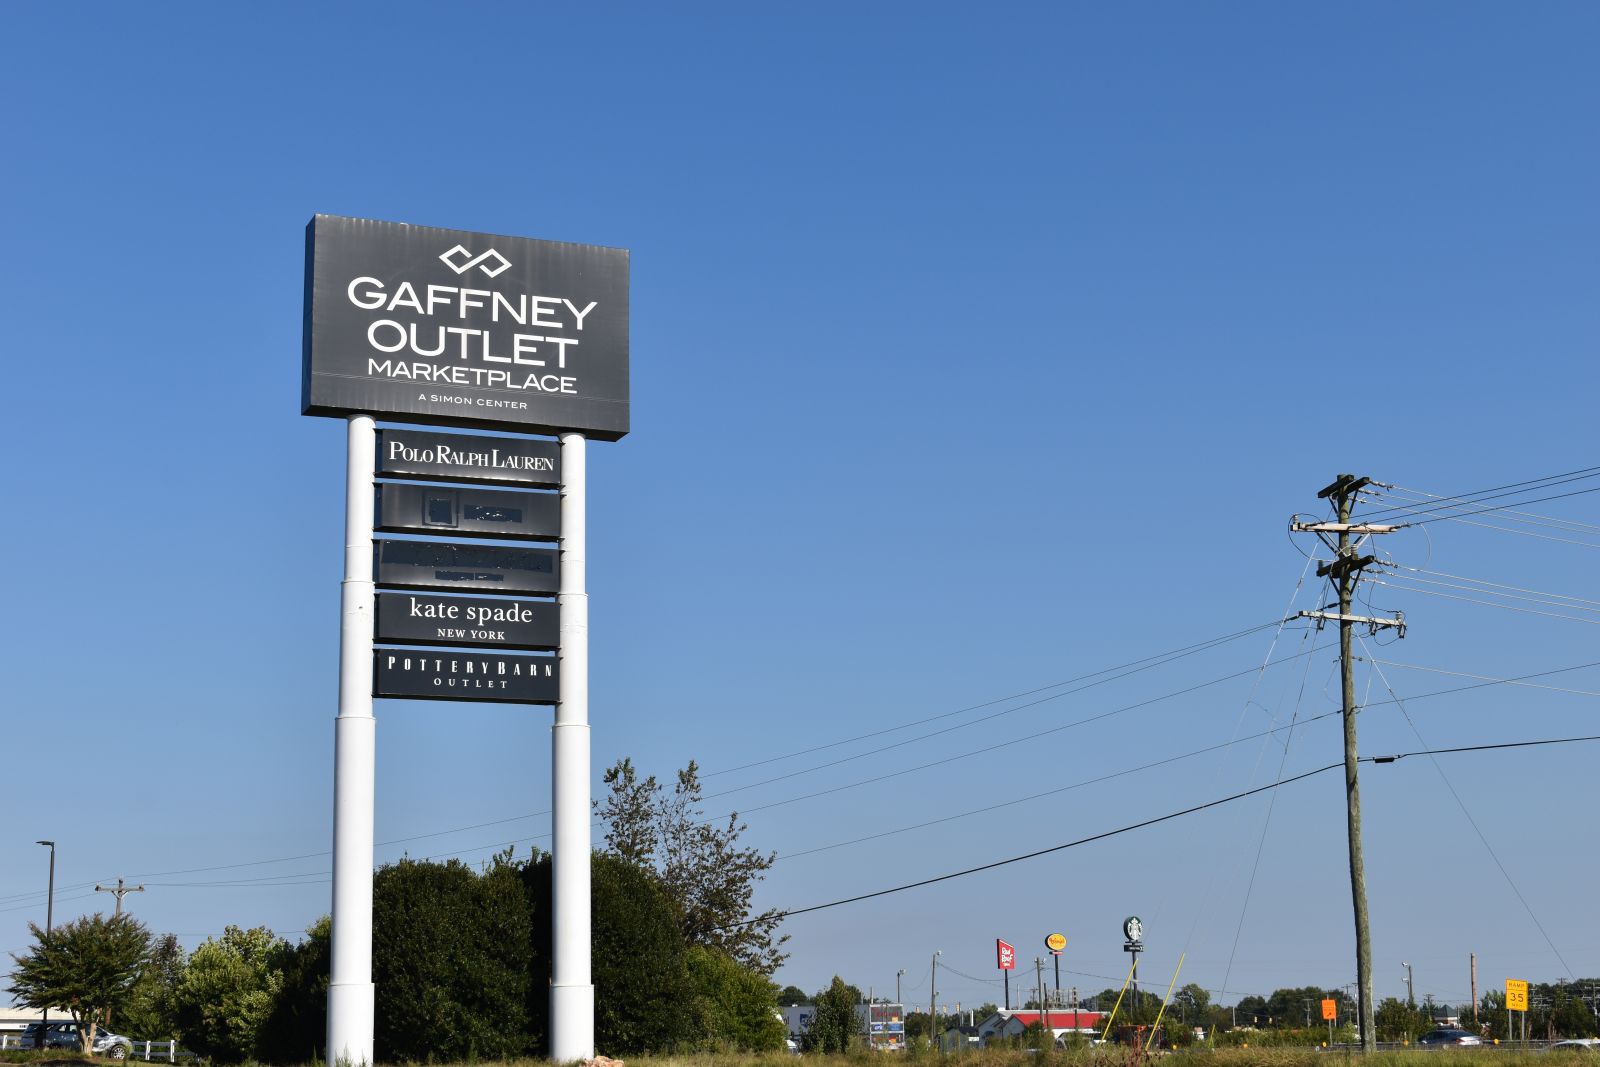 As more national retailers move towards bankruptcy or an online-only platform, almost half the names have been crossed out on the Gaffney Outlet Marketplace sign off I-85. (Photo/Molly Hulsey)